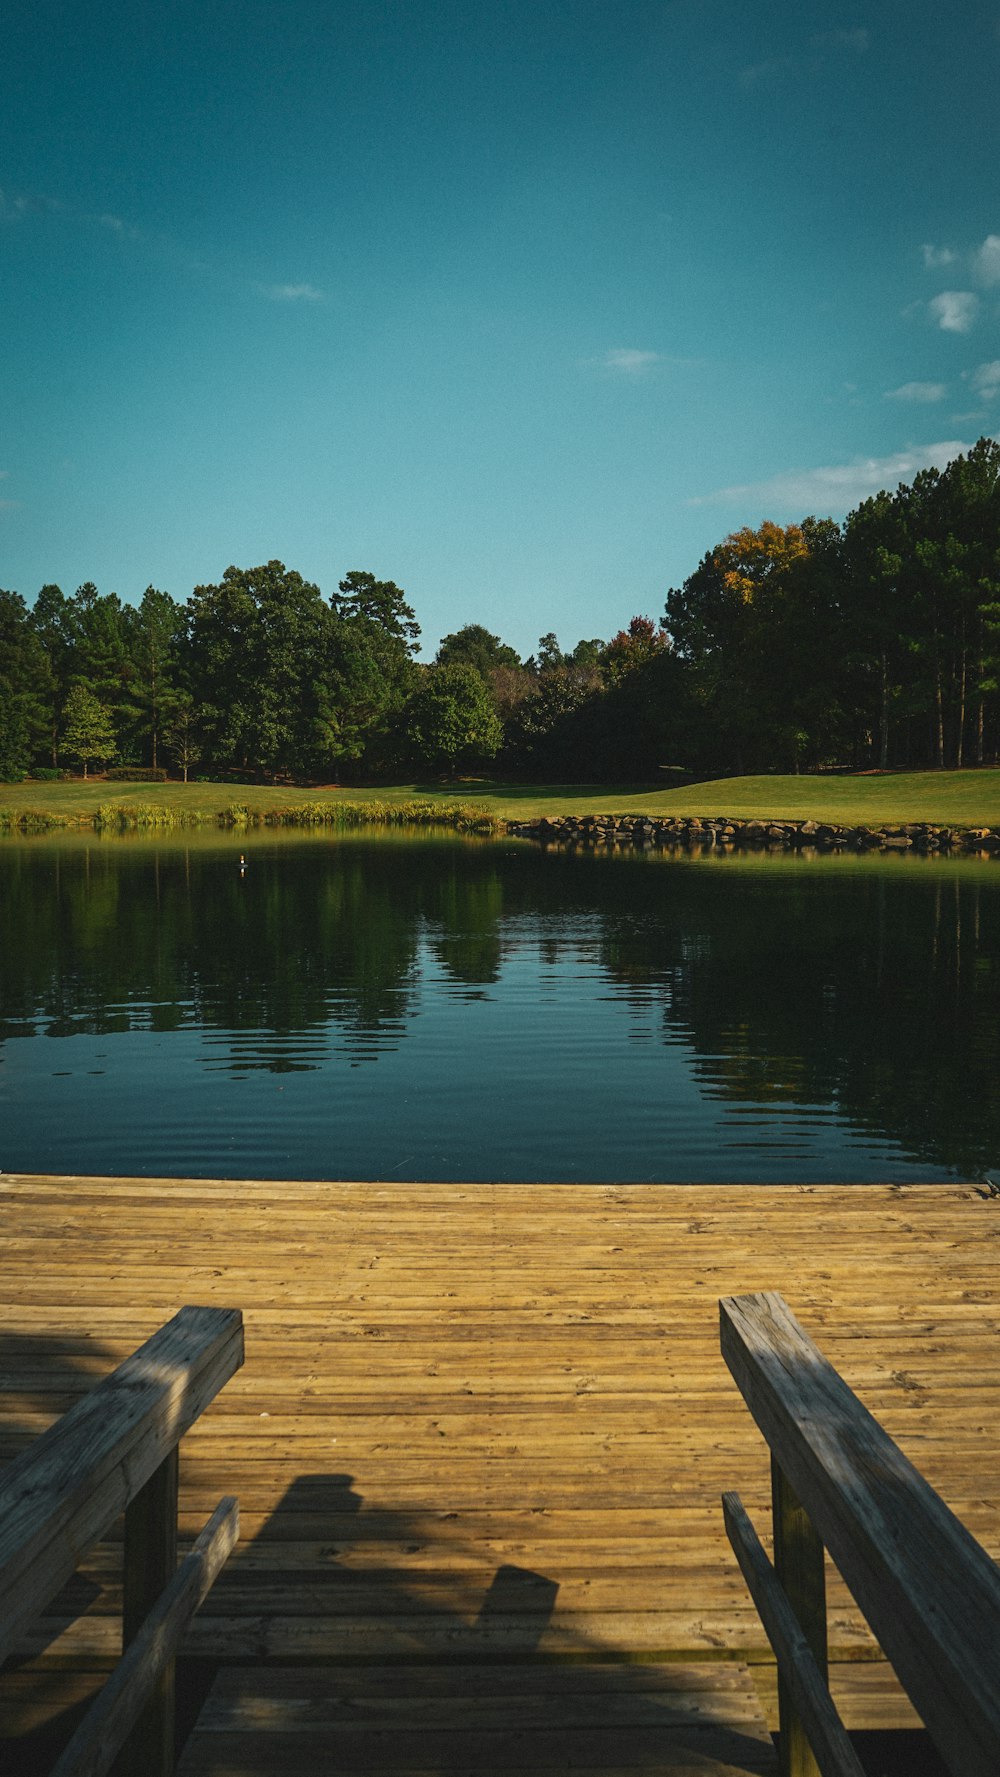 a wooden dock sitting next to a body of water